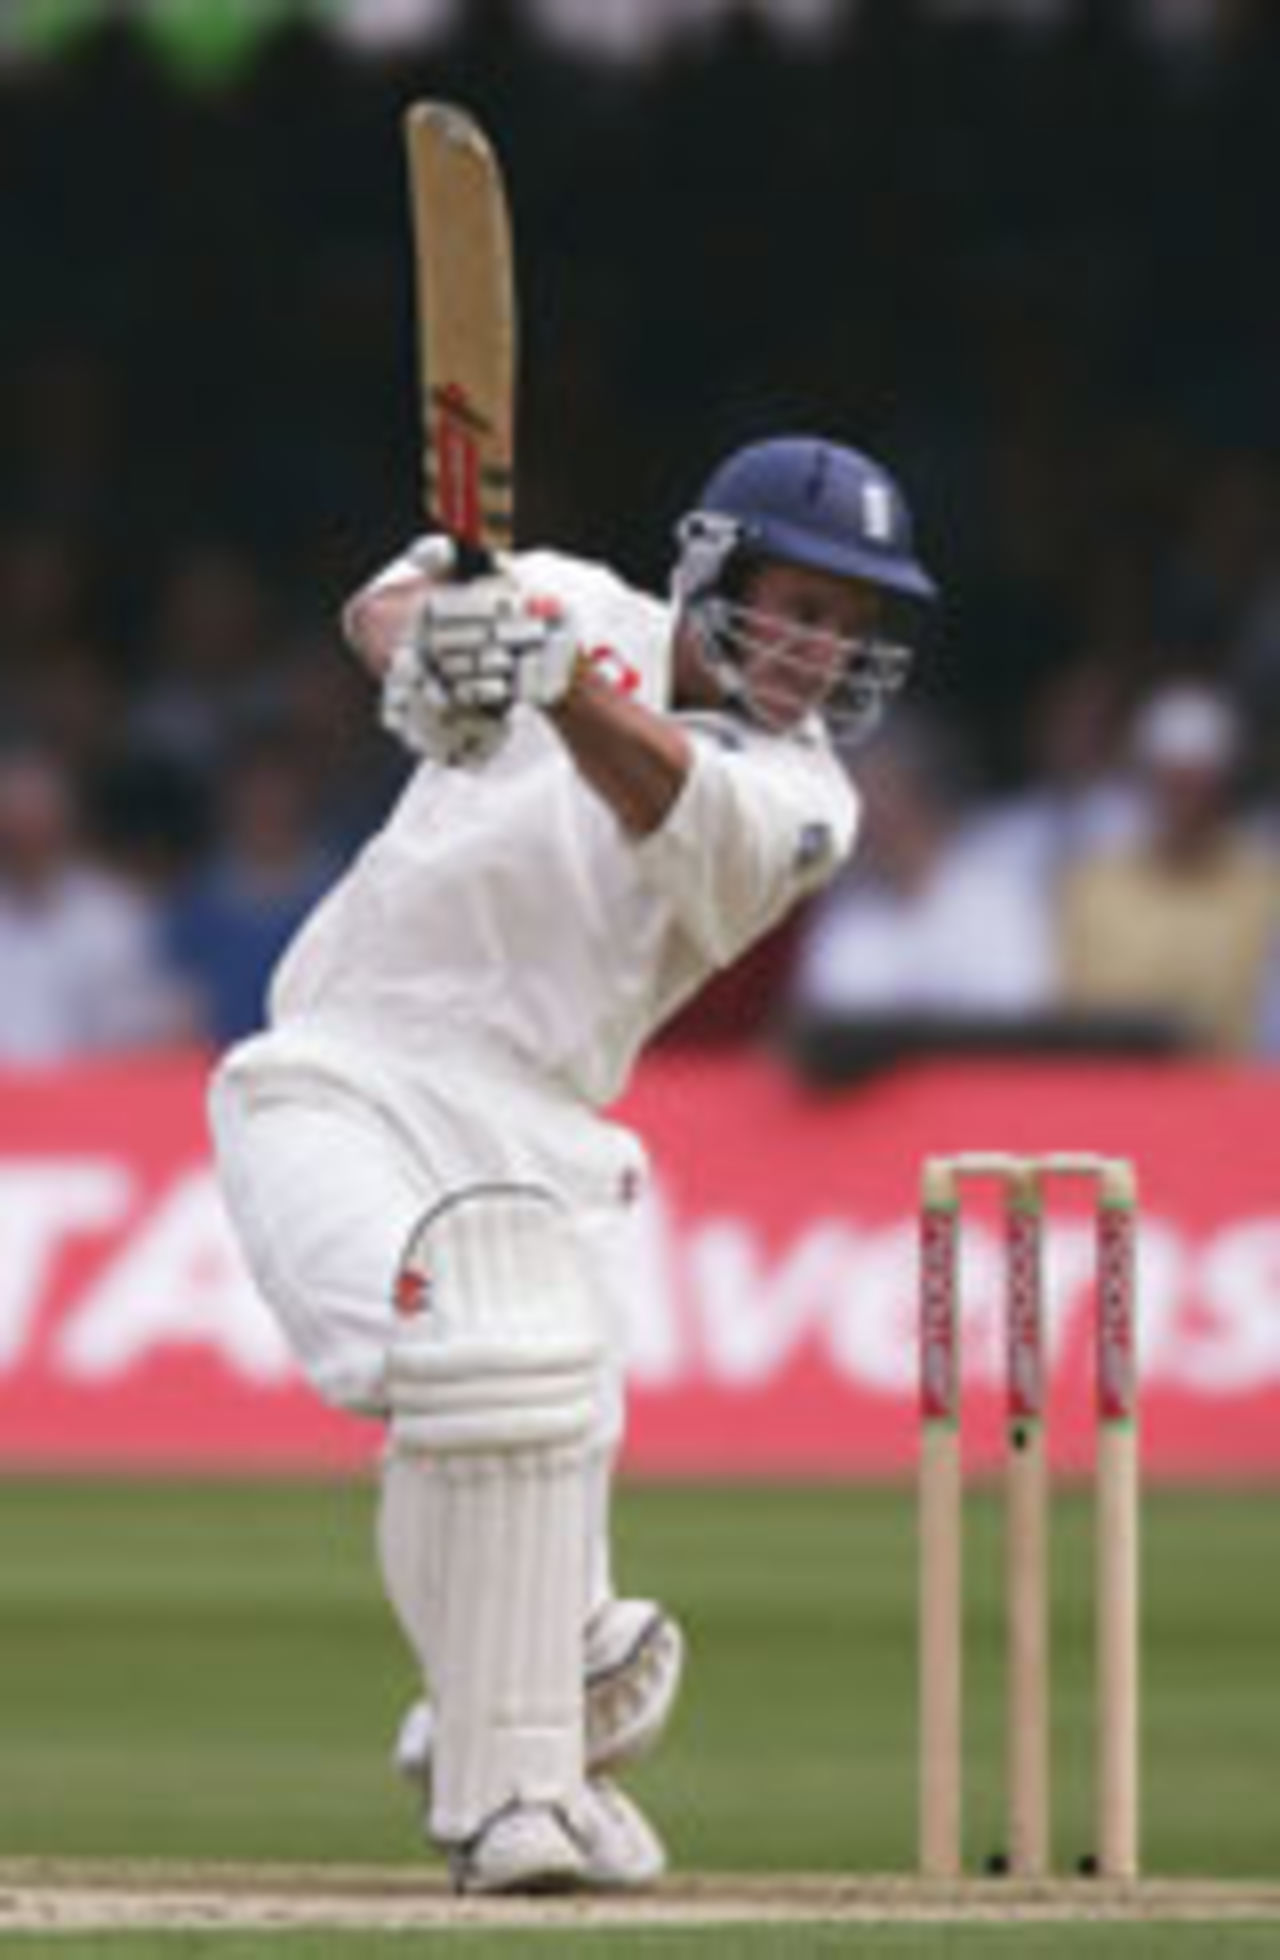 Andrew Strauss drives, England v West Indies, 1st Test, Lord's, July 22, 2004